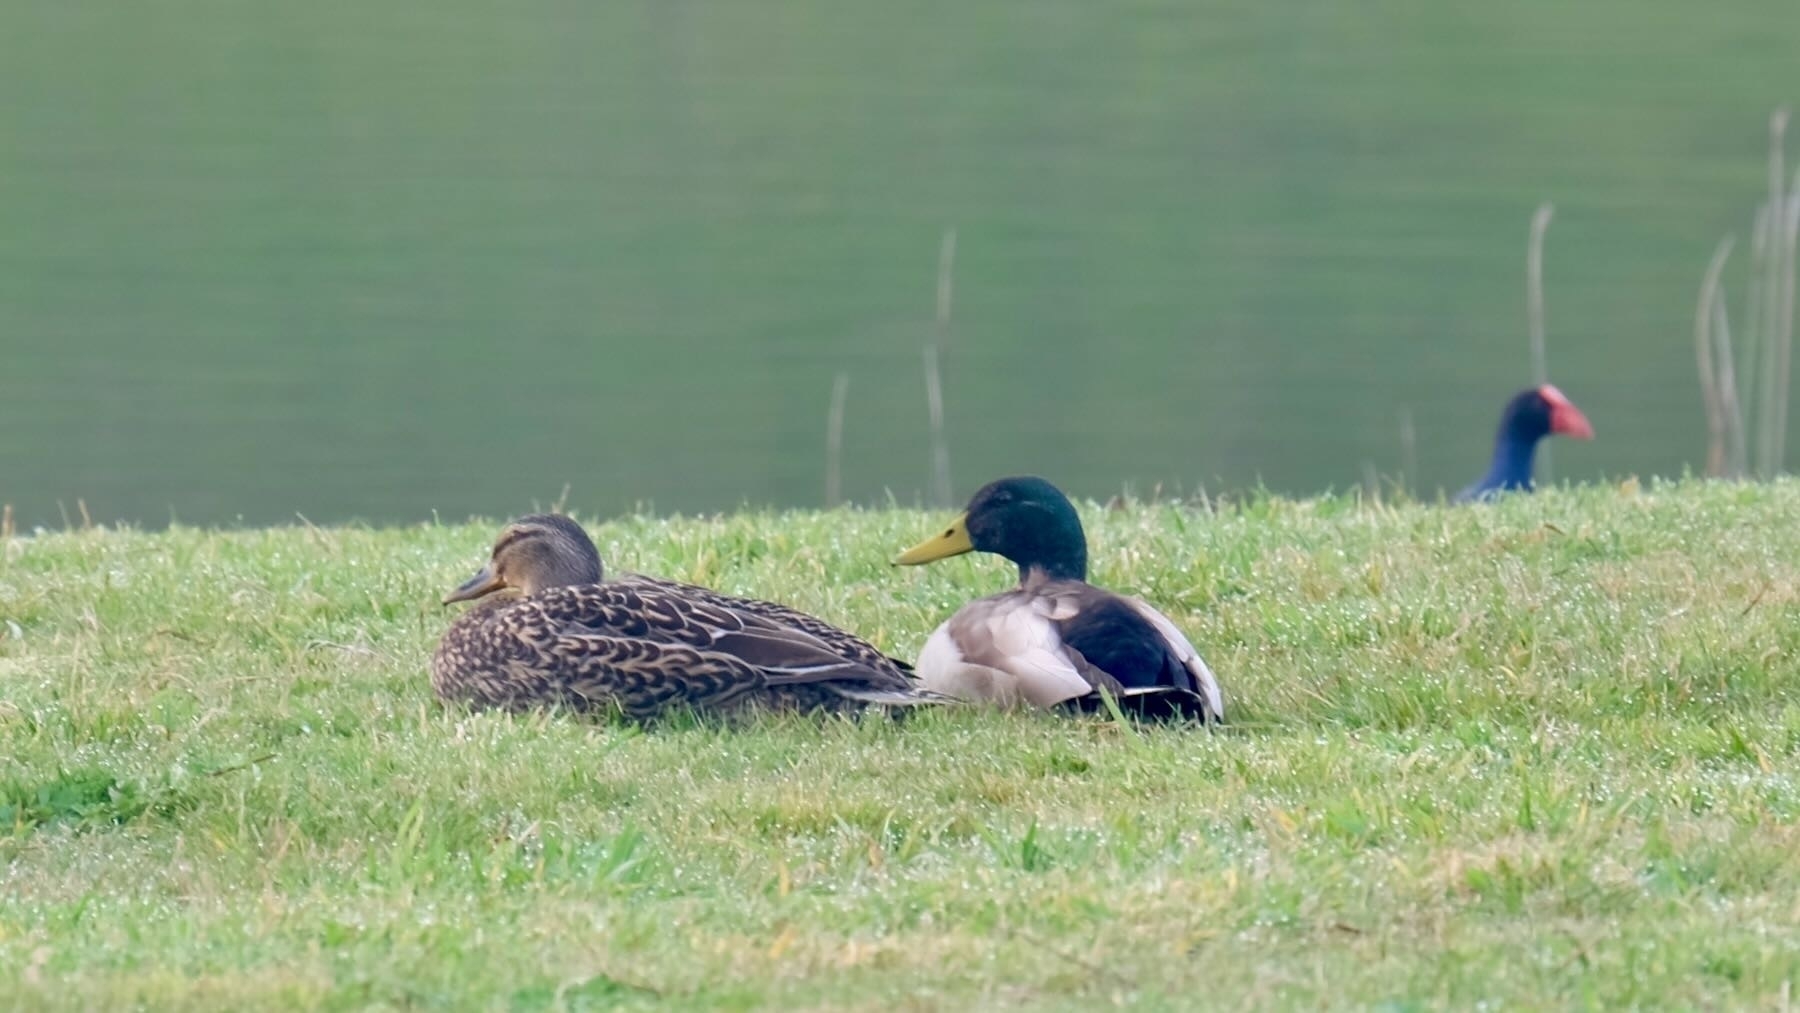 Medium size birds sitting on grass by a lake. One bird is brown, the other has a green head, yellow bill, pale body with dark areas. 